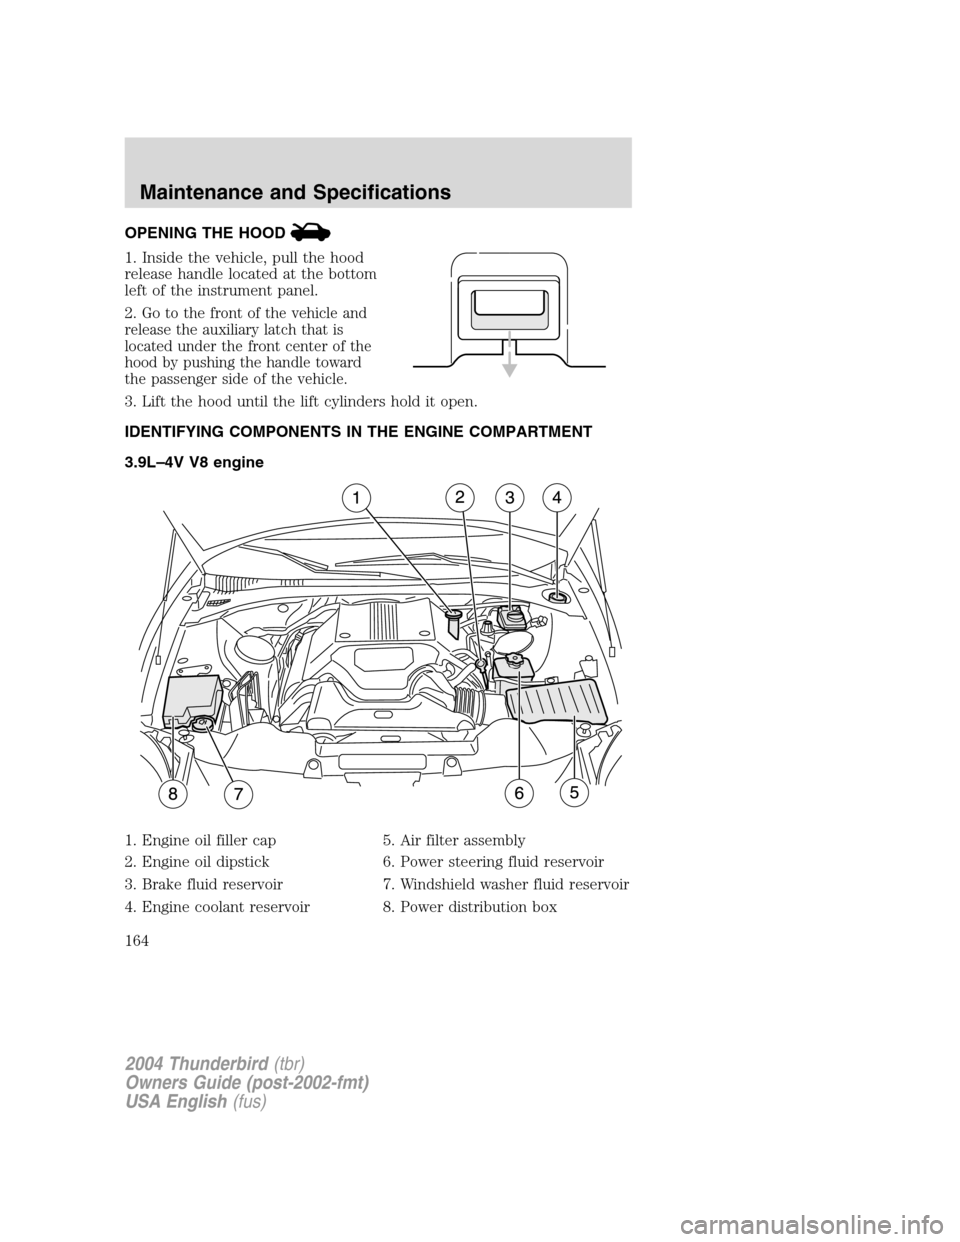 FORD THUNDERBIRD 2004 11.G Owners Manual OPENING THE HOOD
1. Inside the vehicle, pull the hood
release handle located at the bottom
left of the instrument panel.
2.
Go to the front of the vehicle and
release the auxiliary latch that is
locat